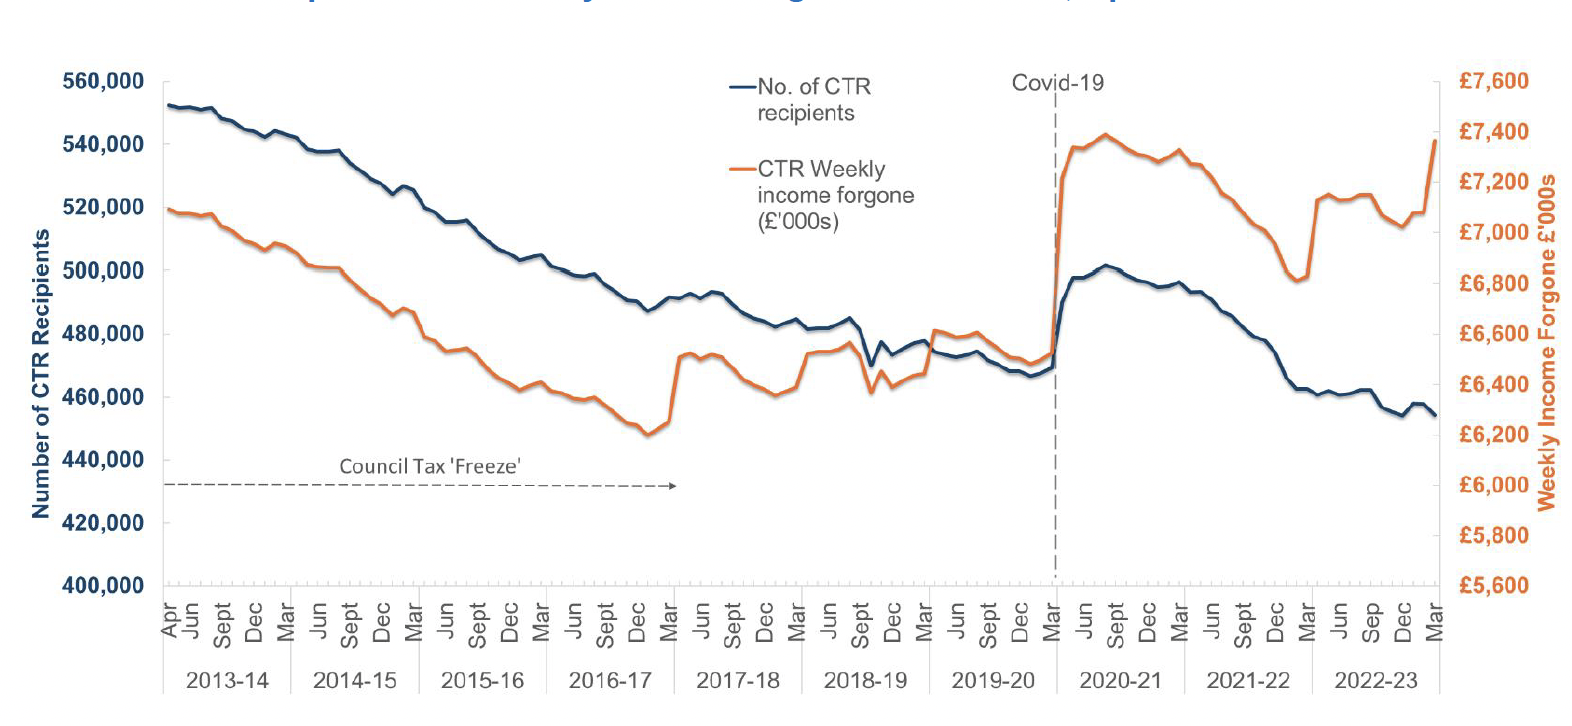 Chart showing CTR recipients and weekly income forgone in Scotland, April 2013 to March 2023